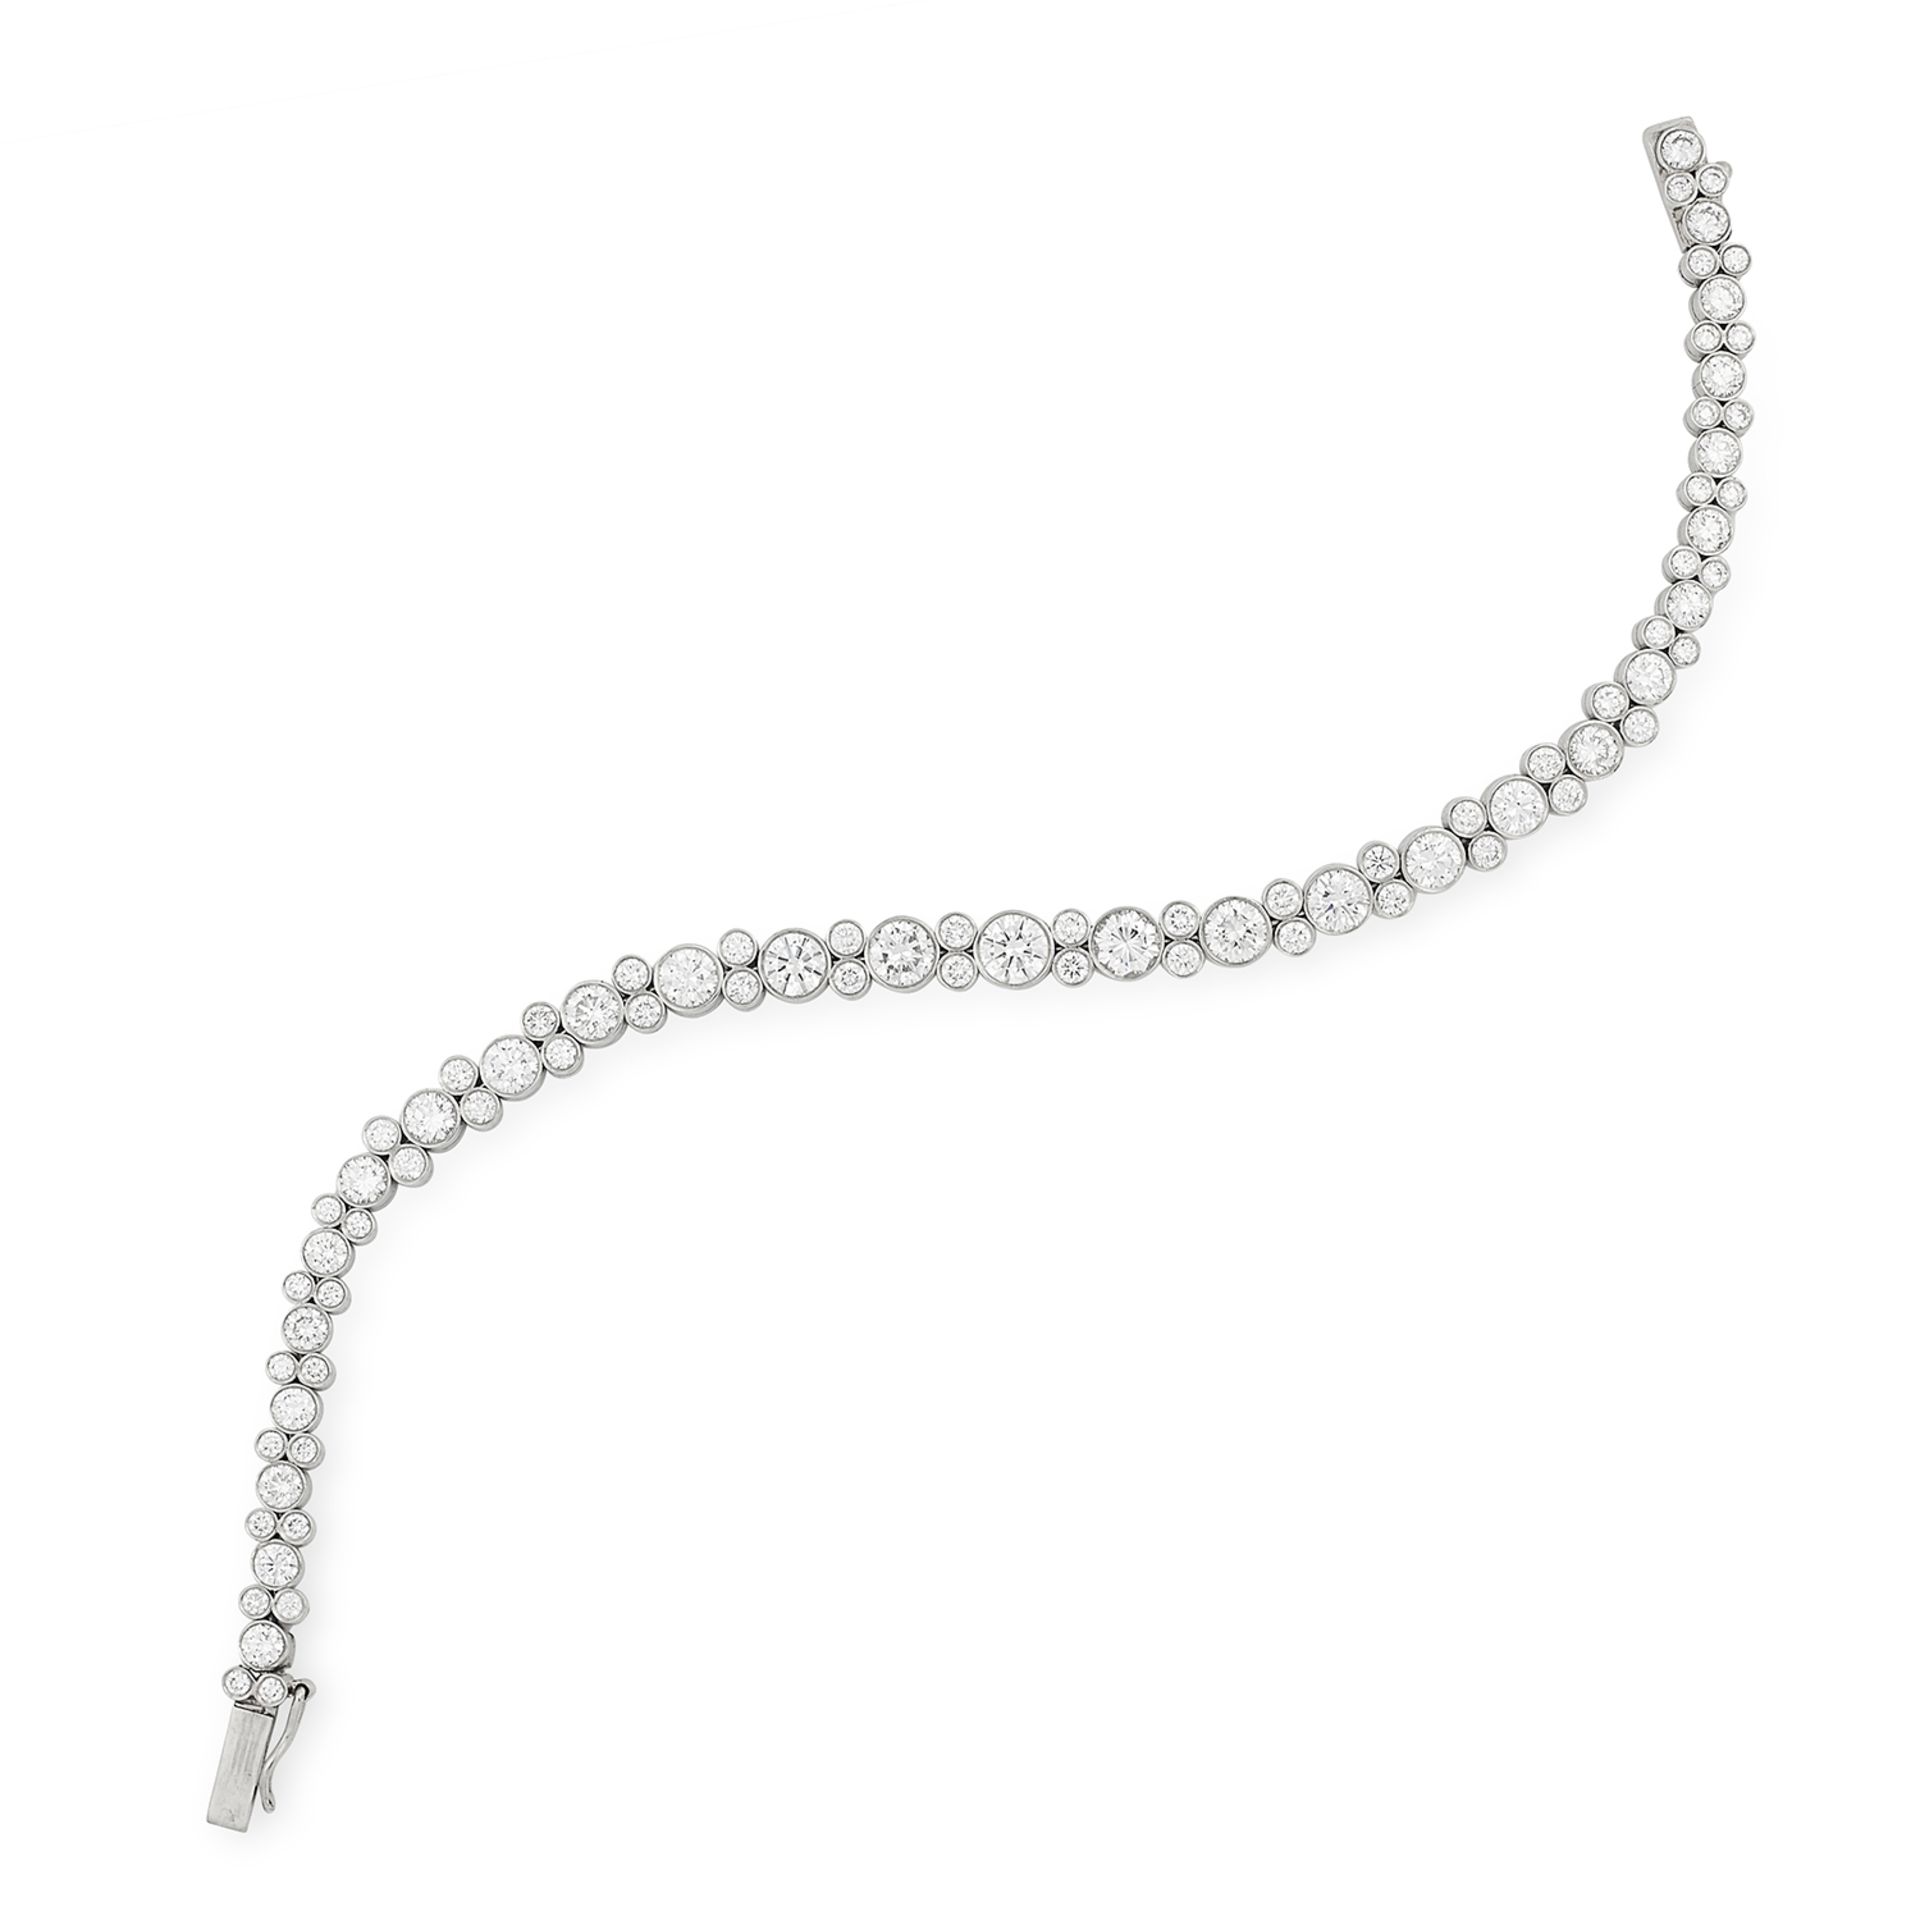 A DIAMOND LINE BRACELET comprising of a single row of graduated round cut diamonds accented by pairs